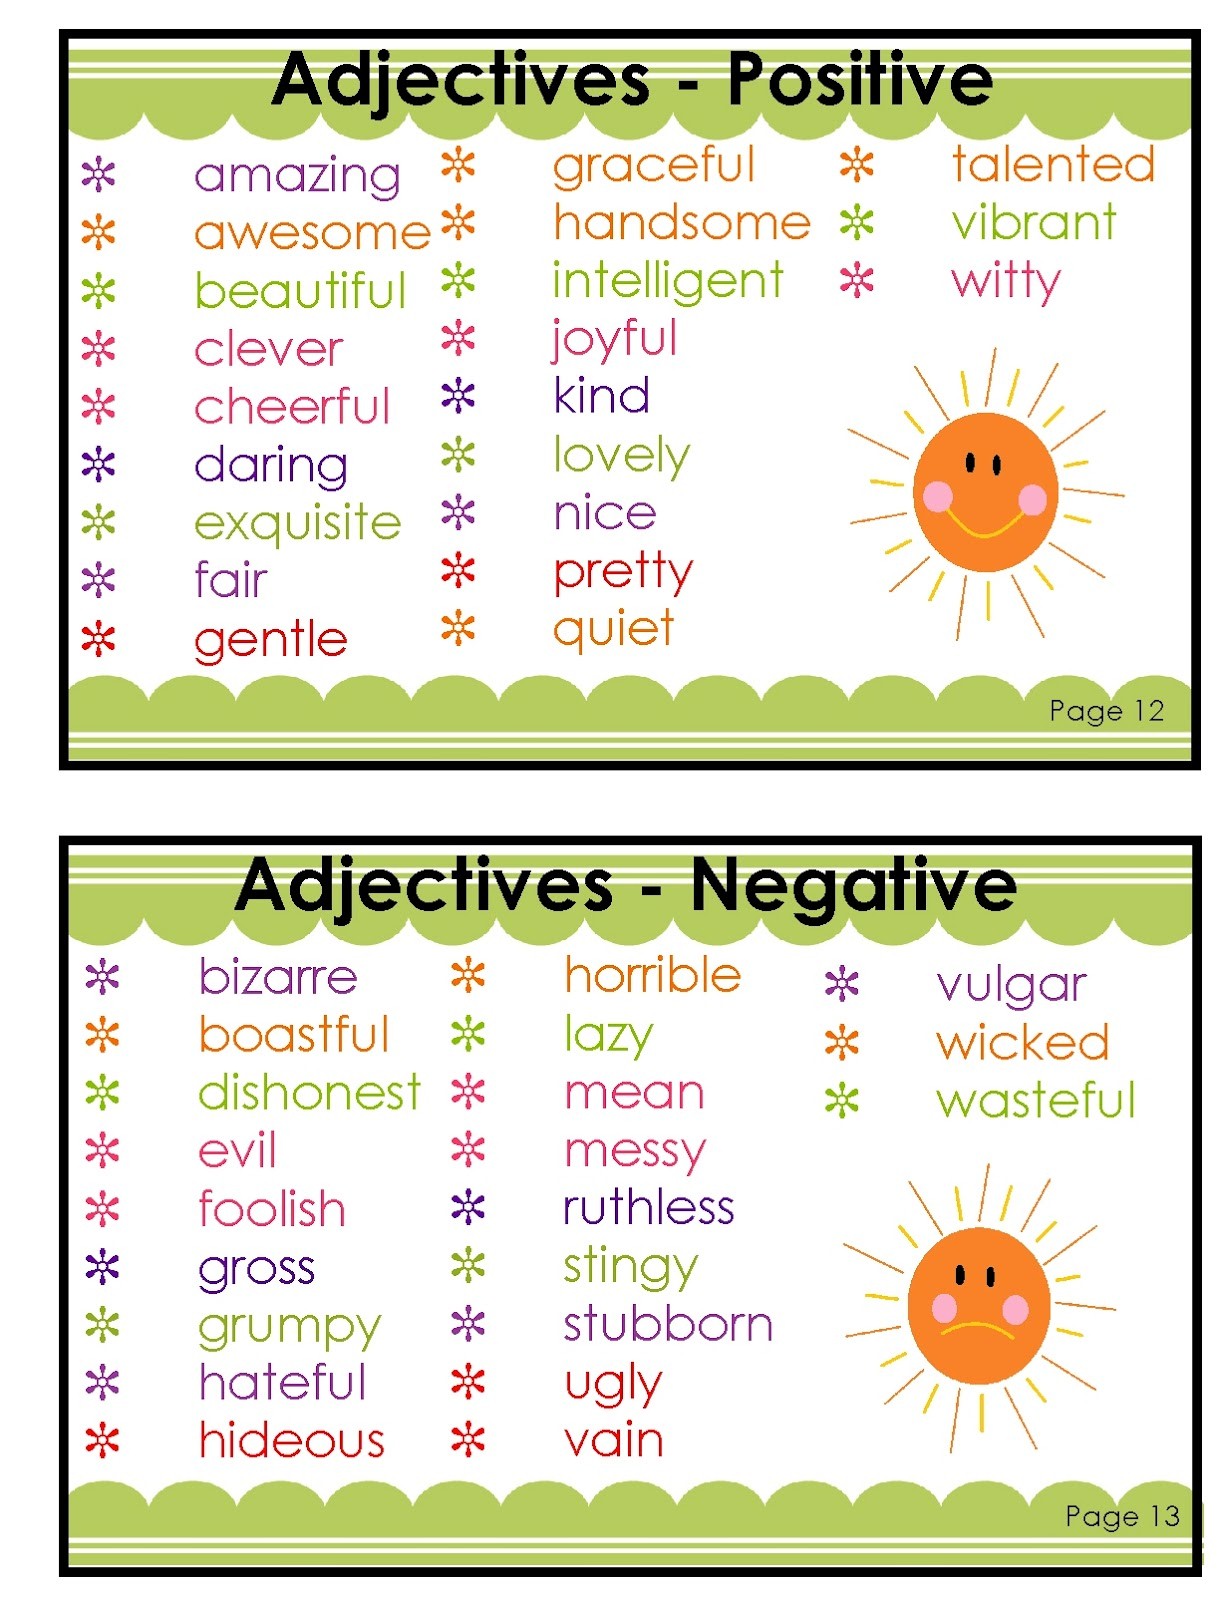 negative-adjectives-to-describe-people-eage-tutor